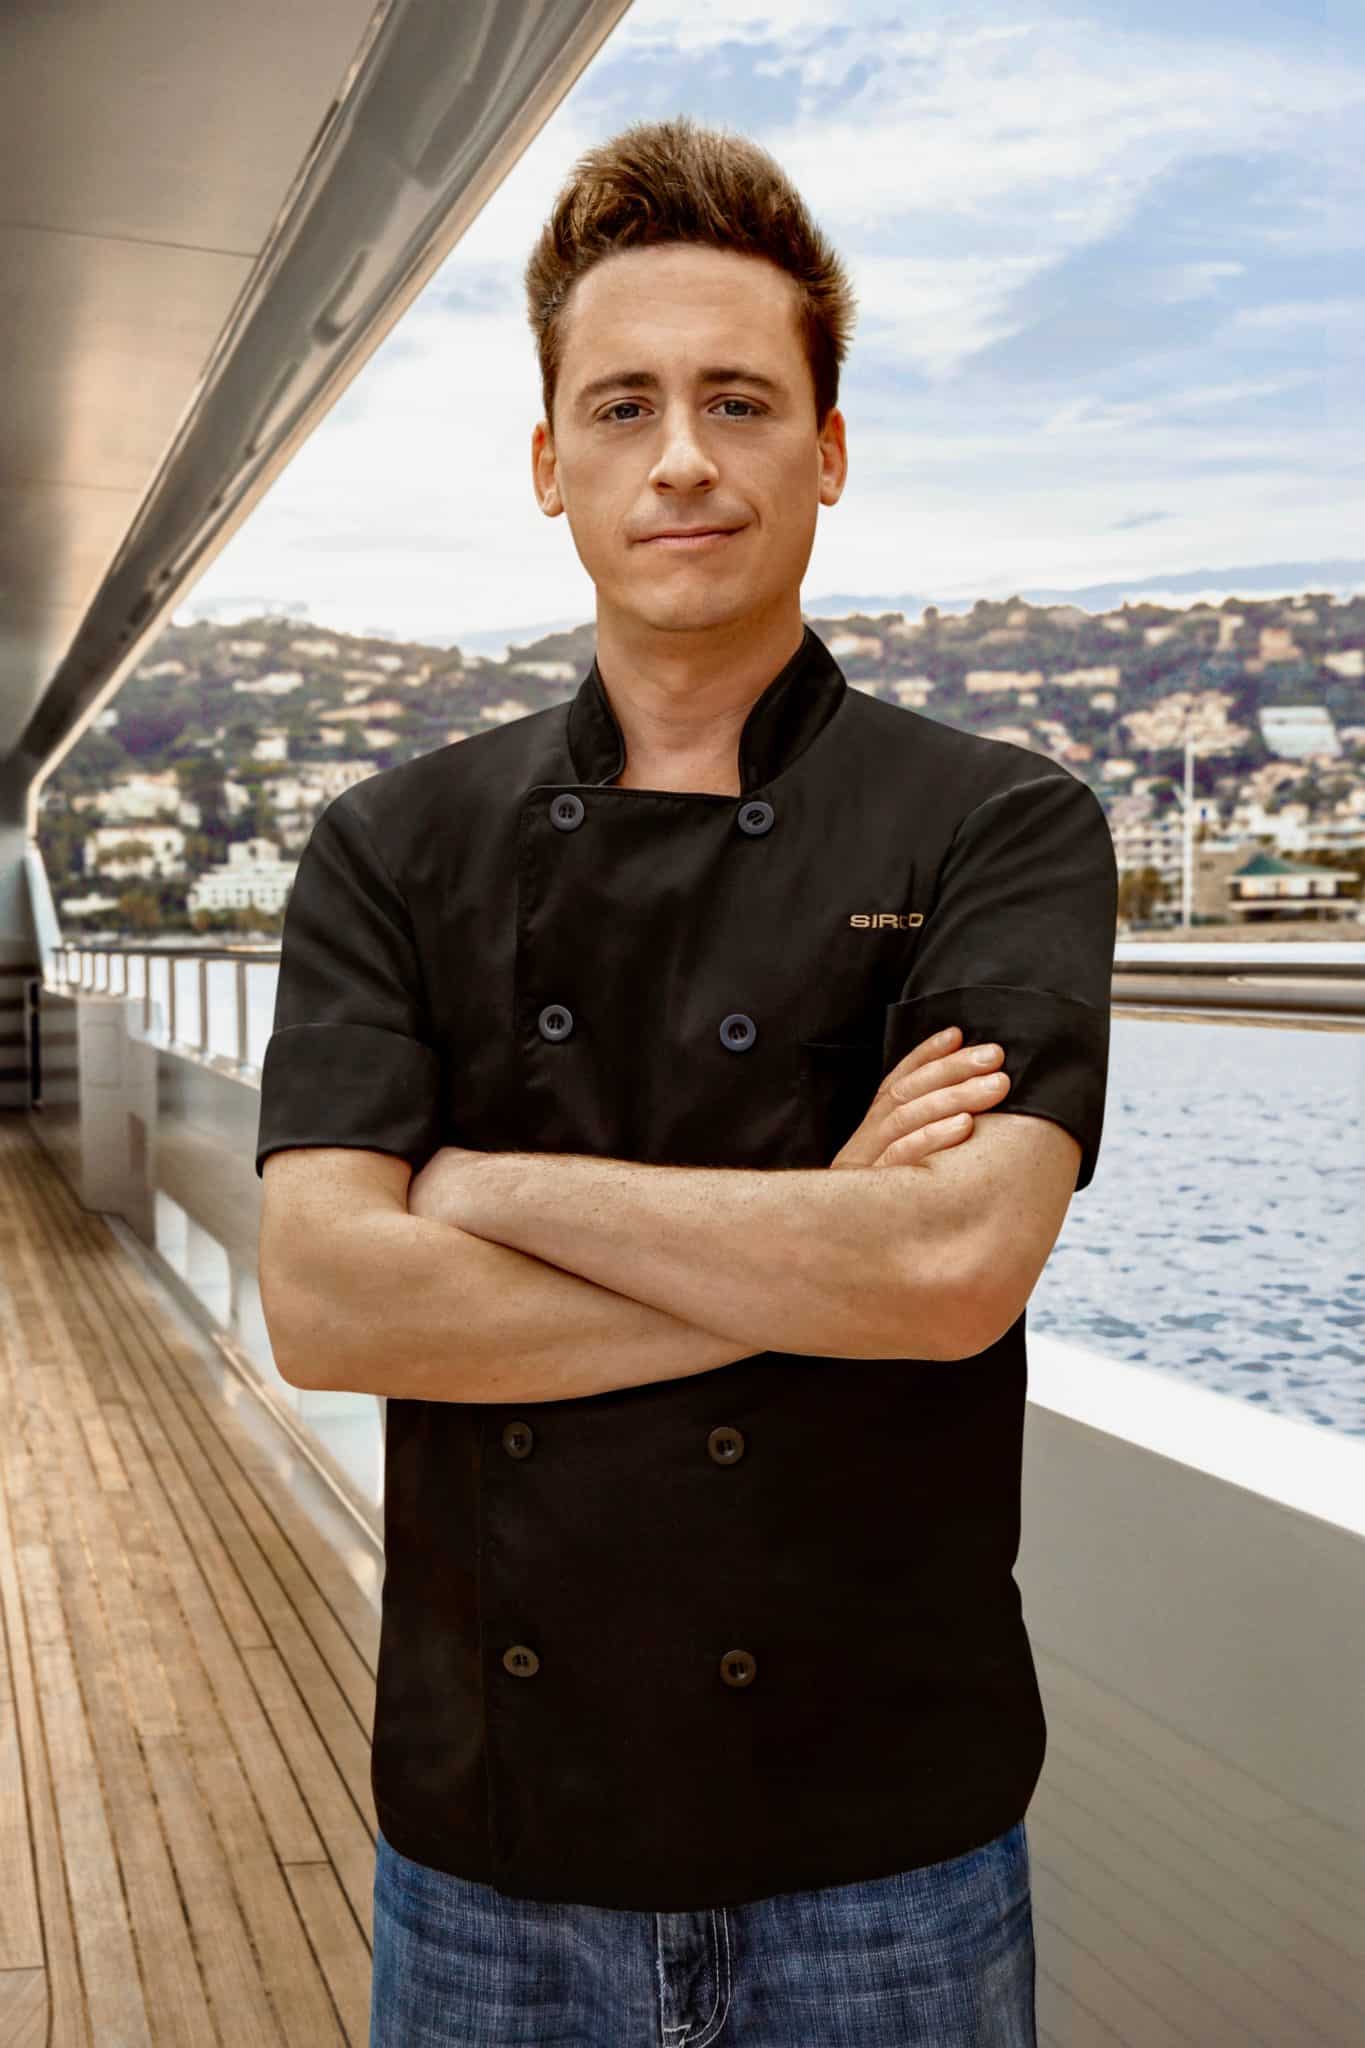 Image of Chef Ben Robinson from Below Deck